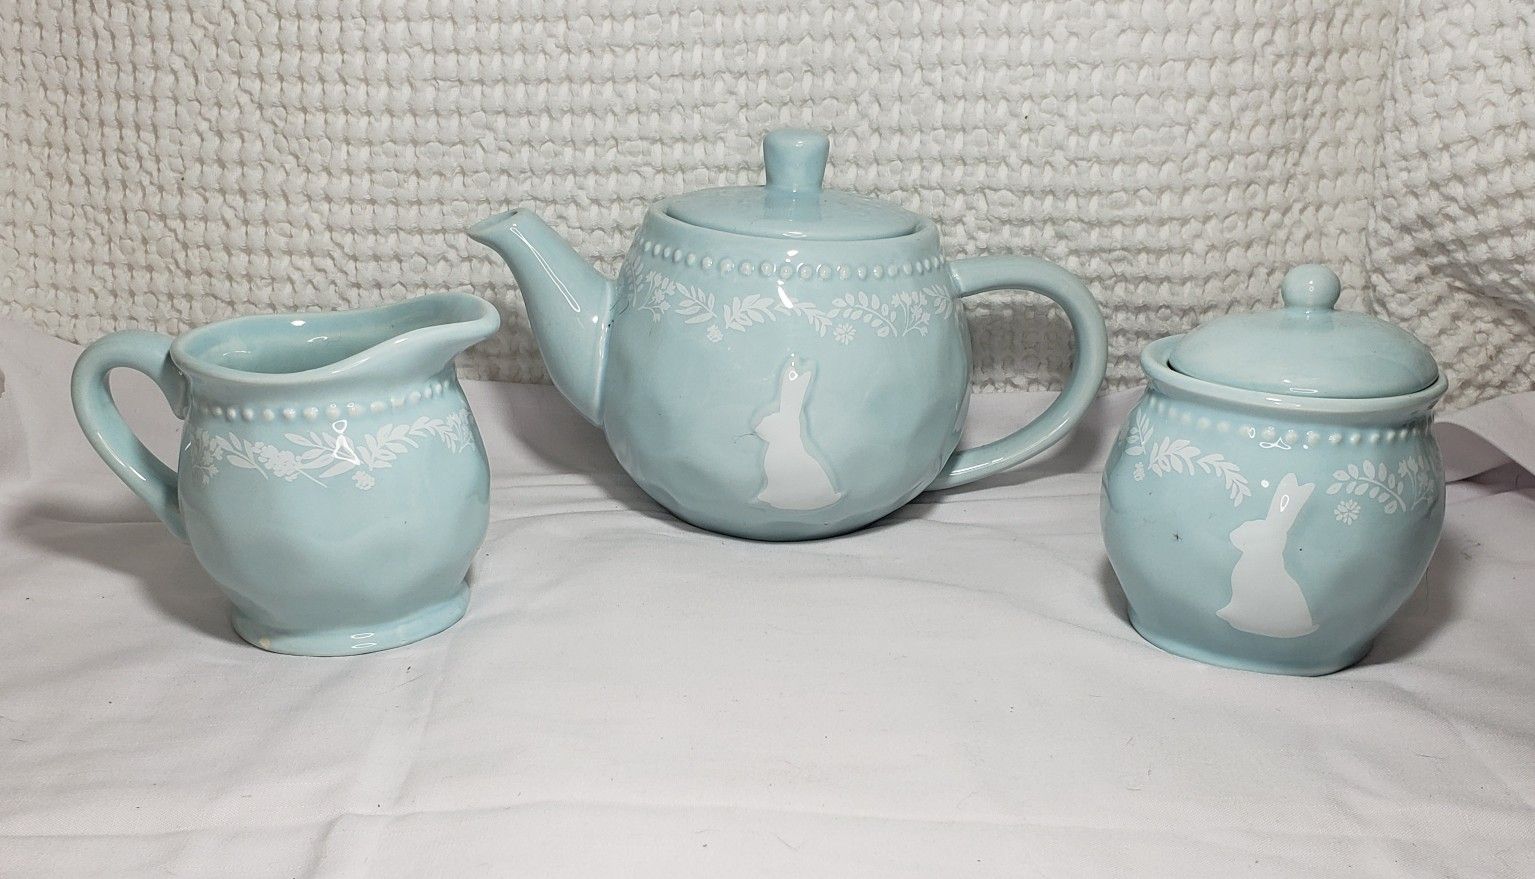 Connections easter teapot with cream and sugar bowls . Good condition and smoke free home.